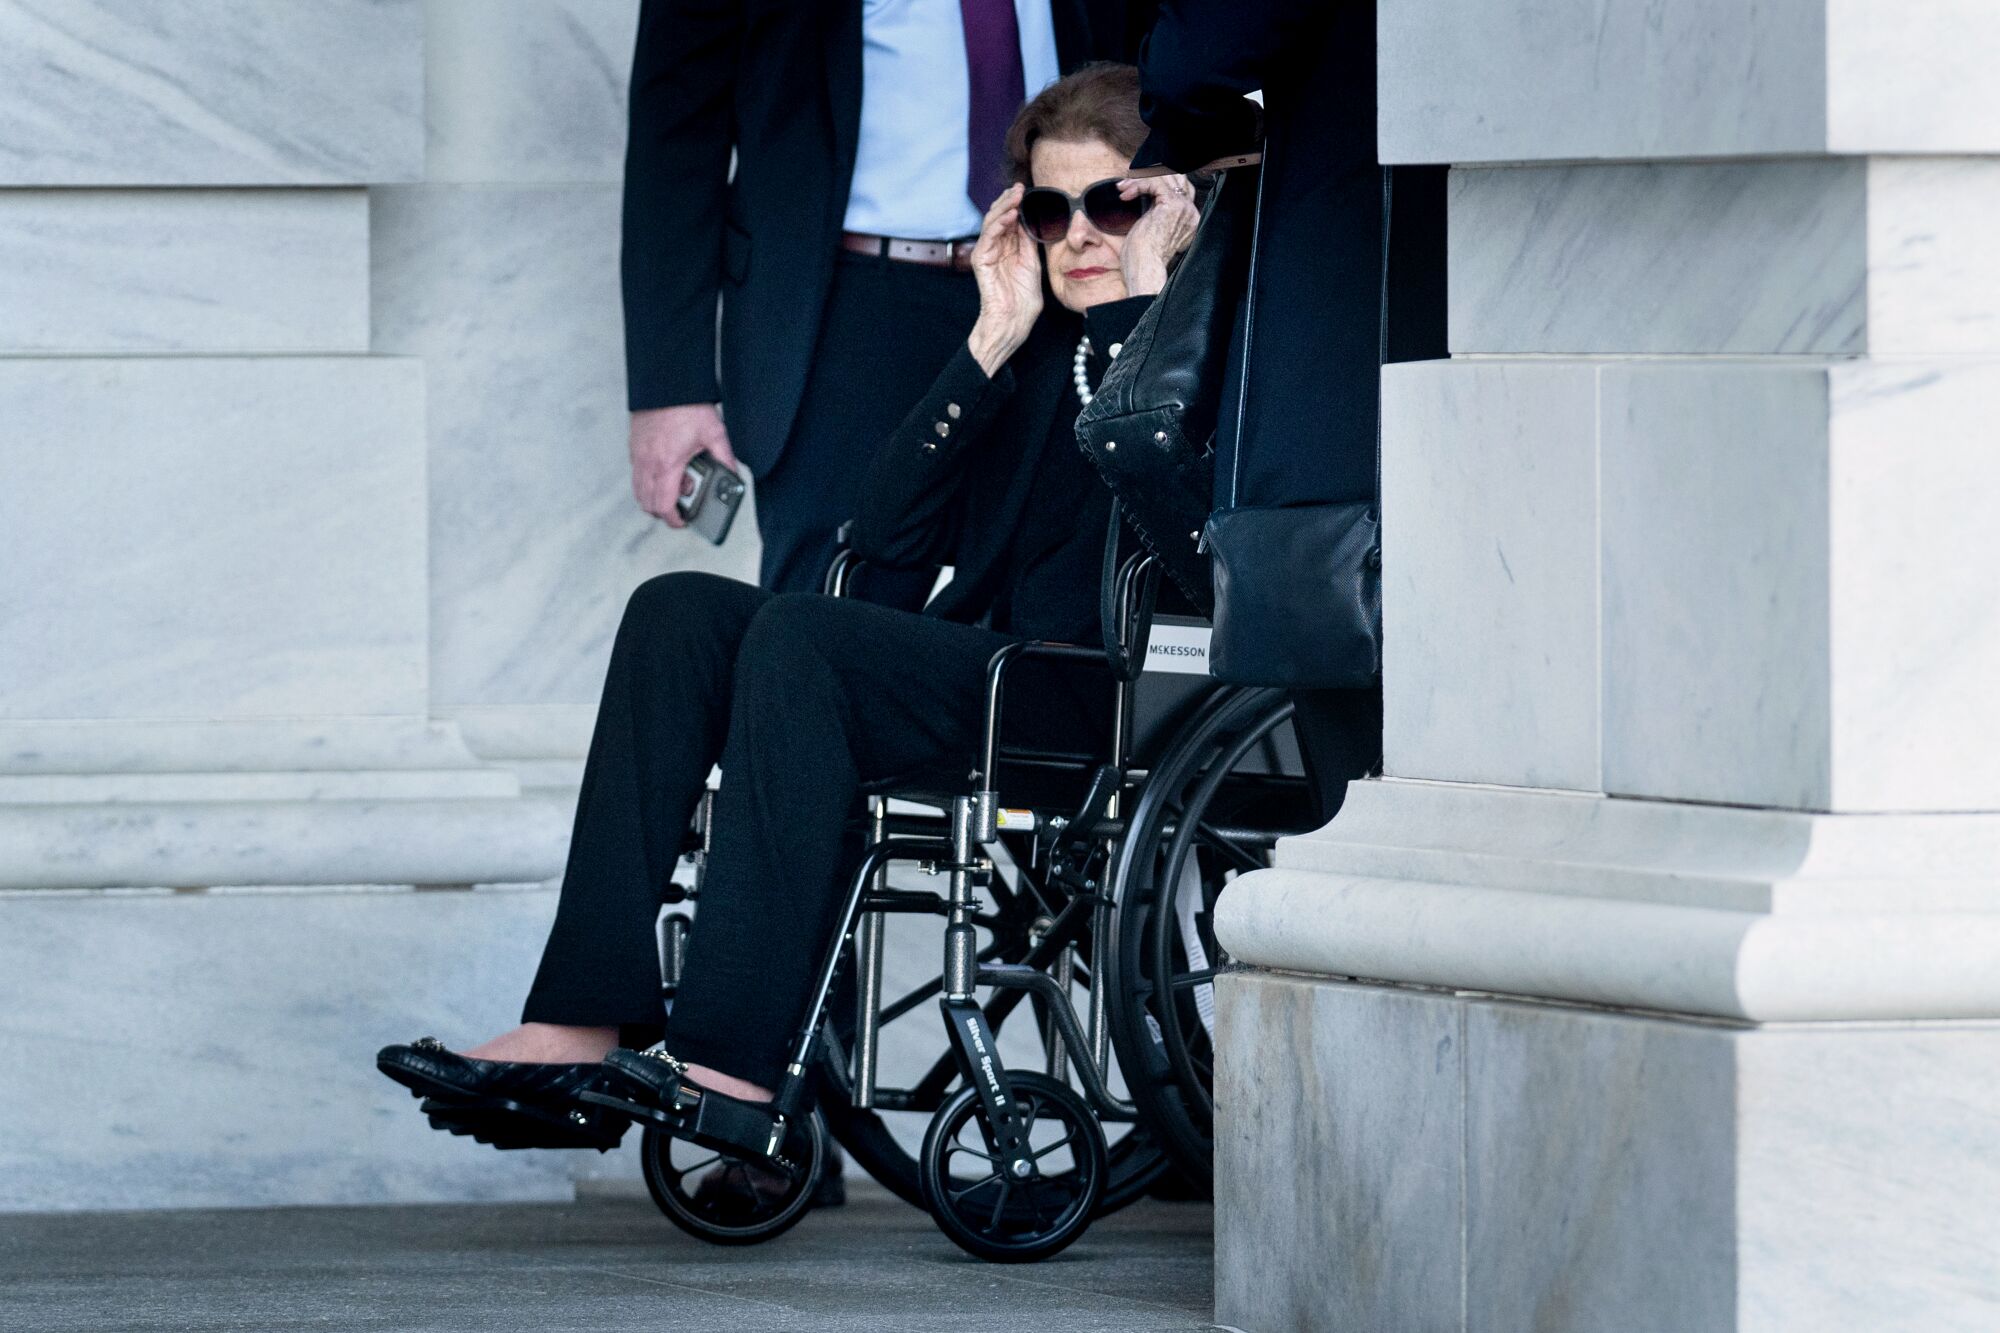 Sen. Dianne Feinstein adjusting her sunglasses as she exits the Capitol in a wheelchair.